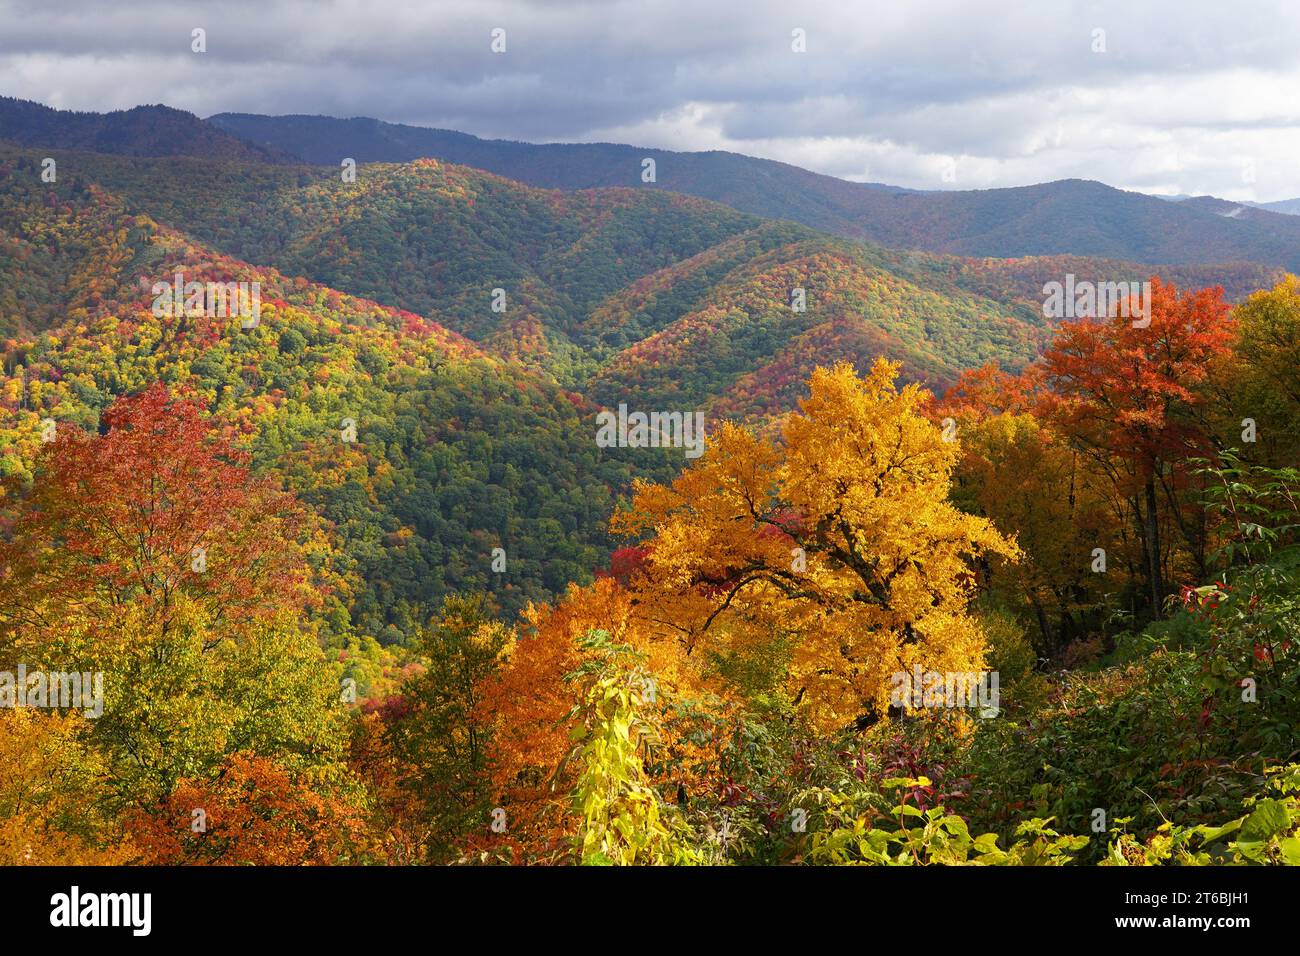 Vibrant Fall colors on the mountains in Great Smoky Mountains National Park Stock Photo